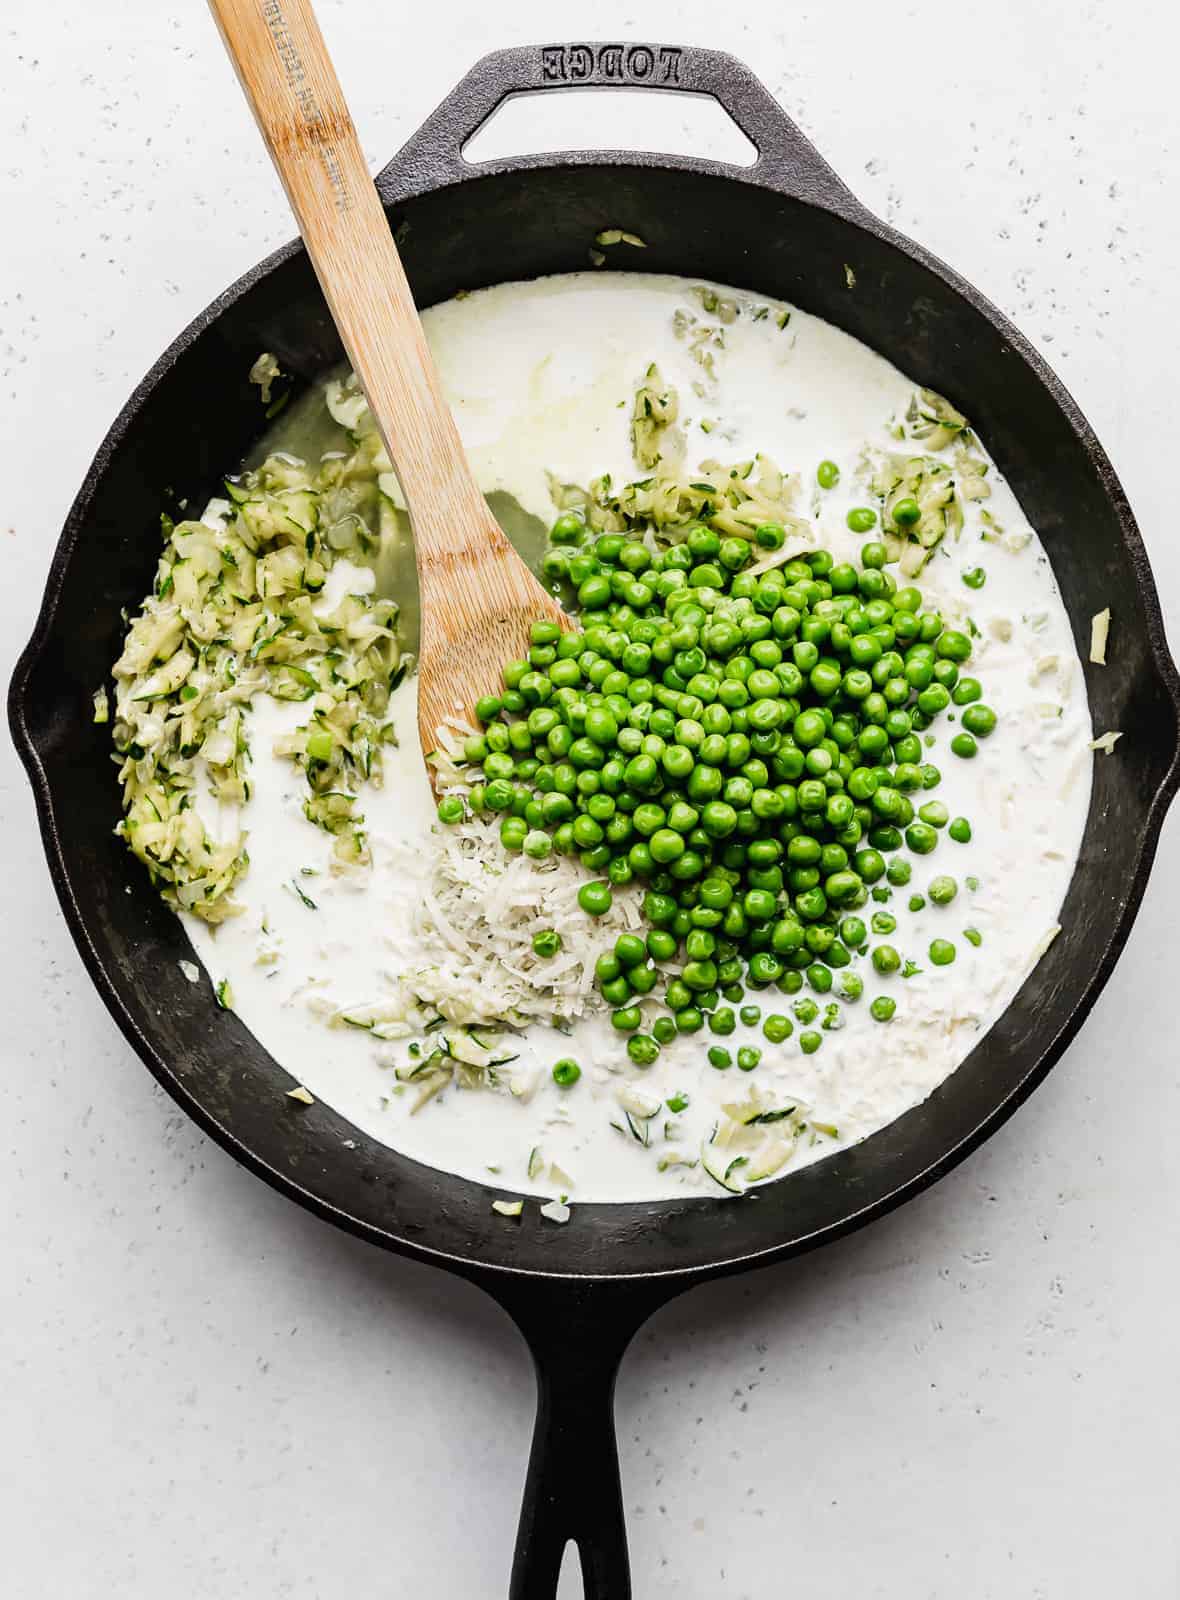 A skillet full of frozen peas, shredded zucchini, and a white sauce.